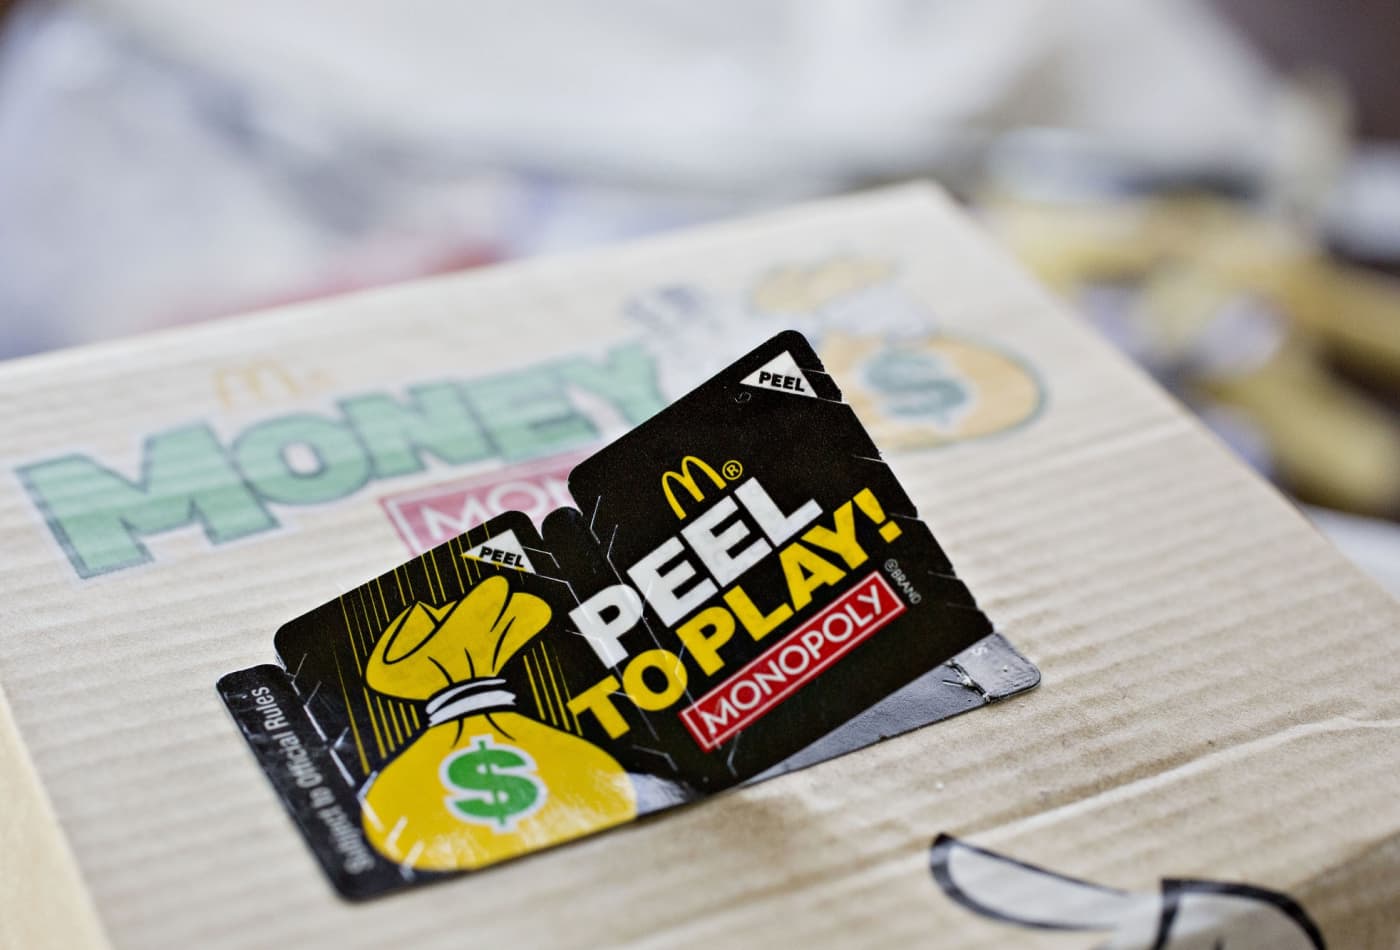 How 'McMillions' scam rigged the McDonald's Monopoly game